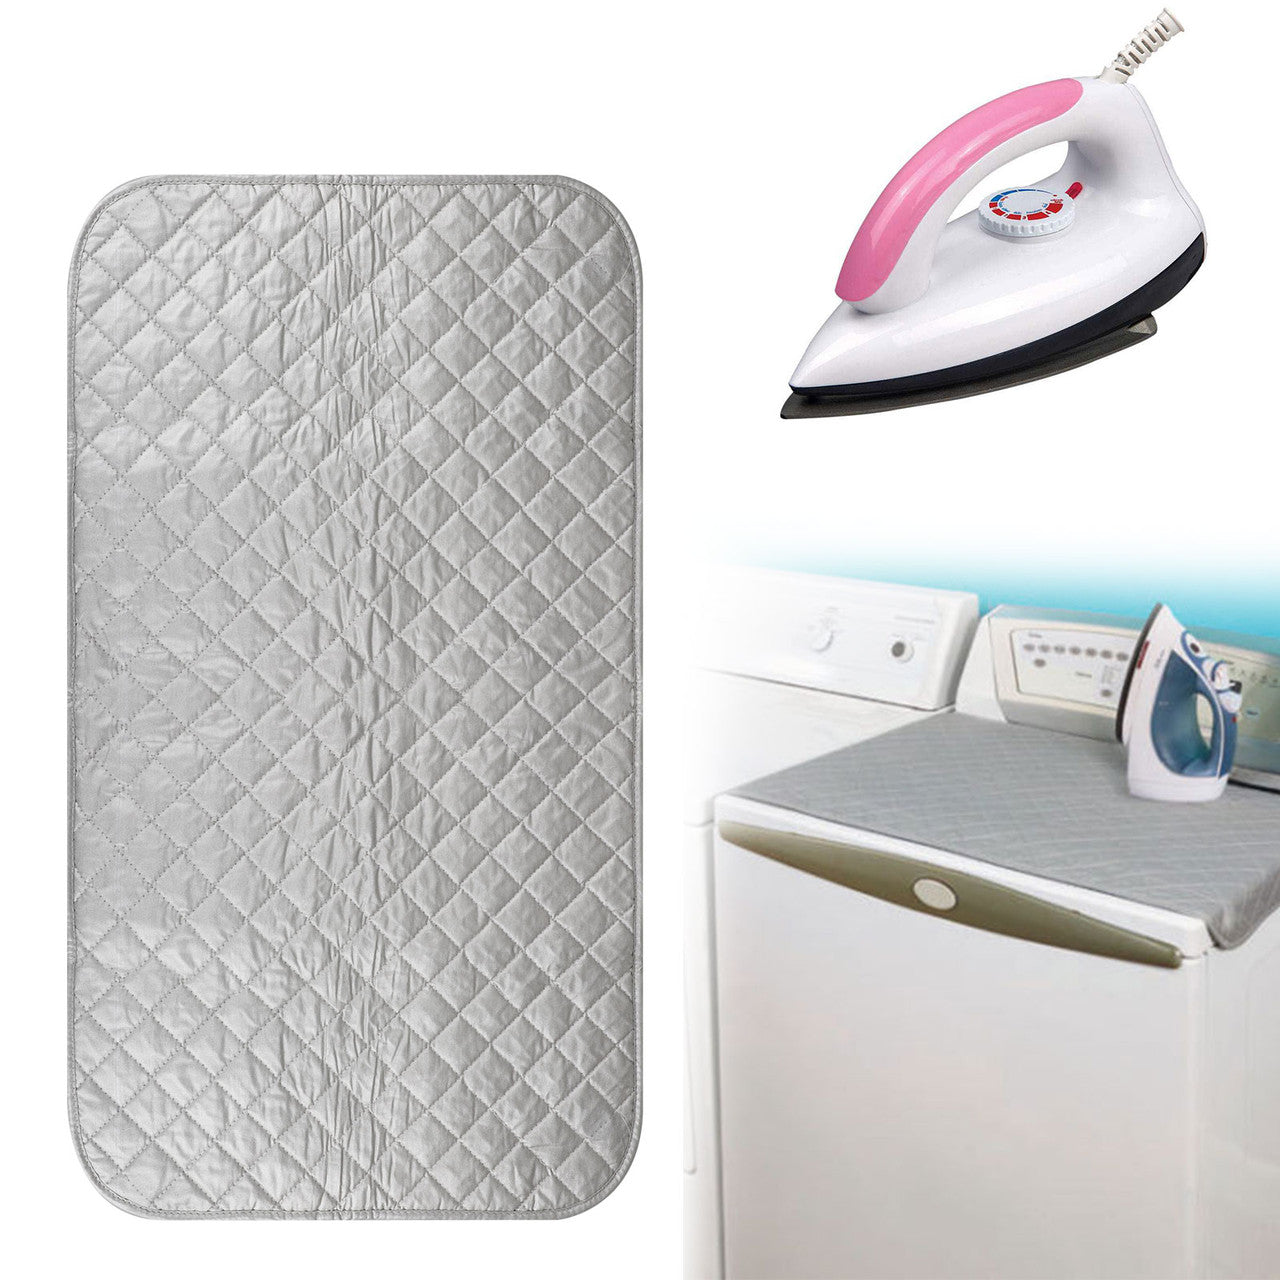 Portable Cover for Washer, Dryer, Table, Bed, Countertop. Dry Safe & Heat Resistant Pad. Quilted Laundry Mat fo Everywhere